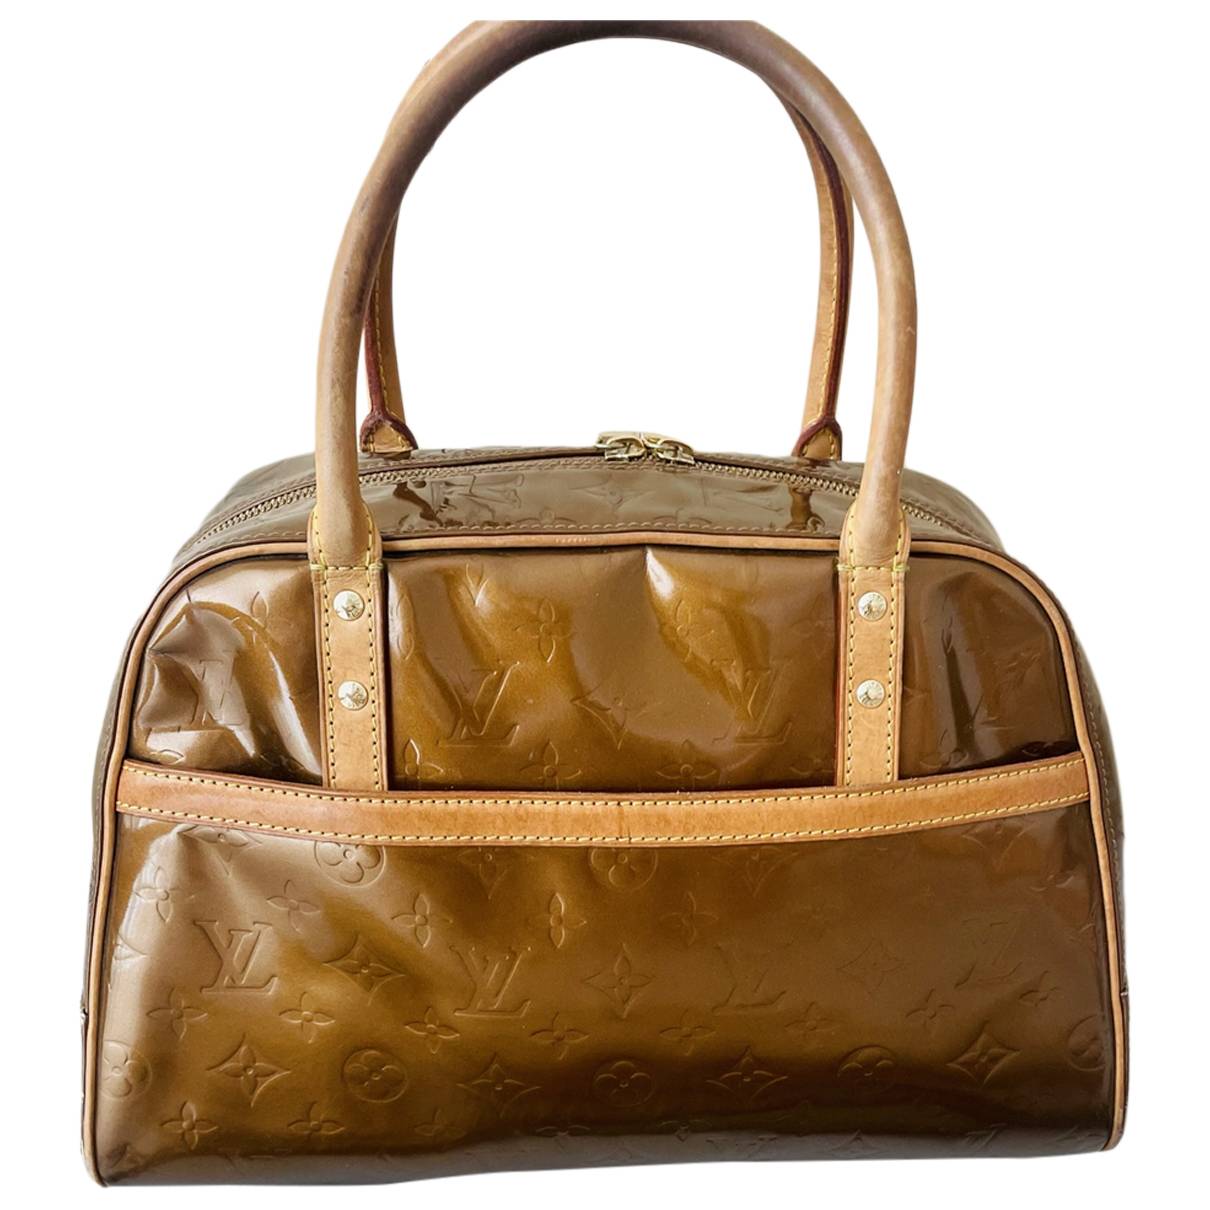 Tompkins square patent leather handbag Louis Vuitton Gold in Patent leather  - 30919125